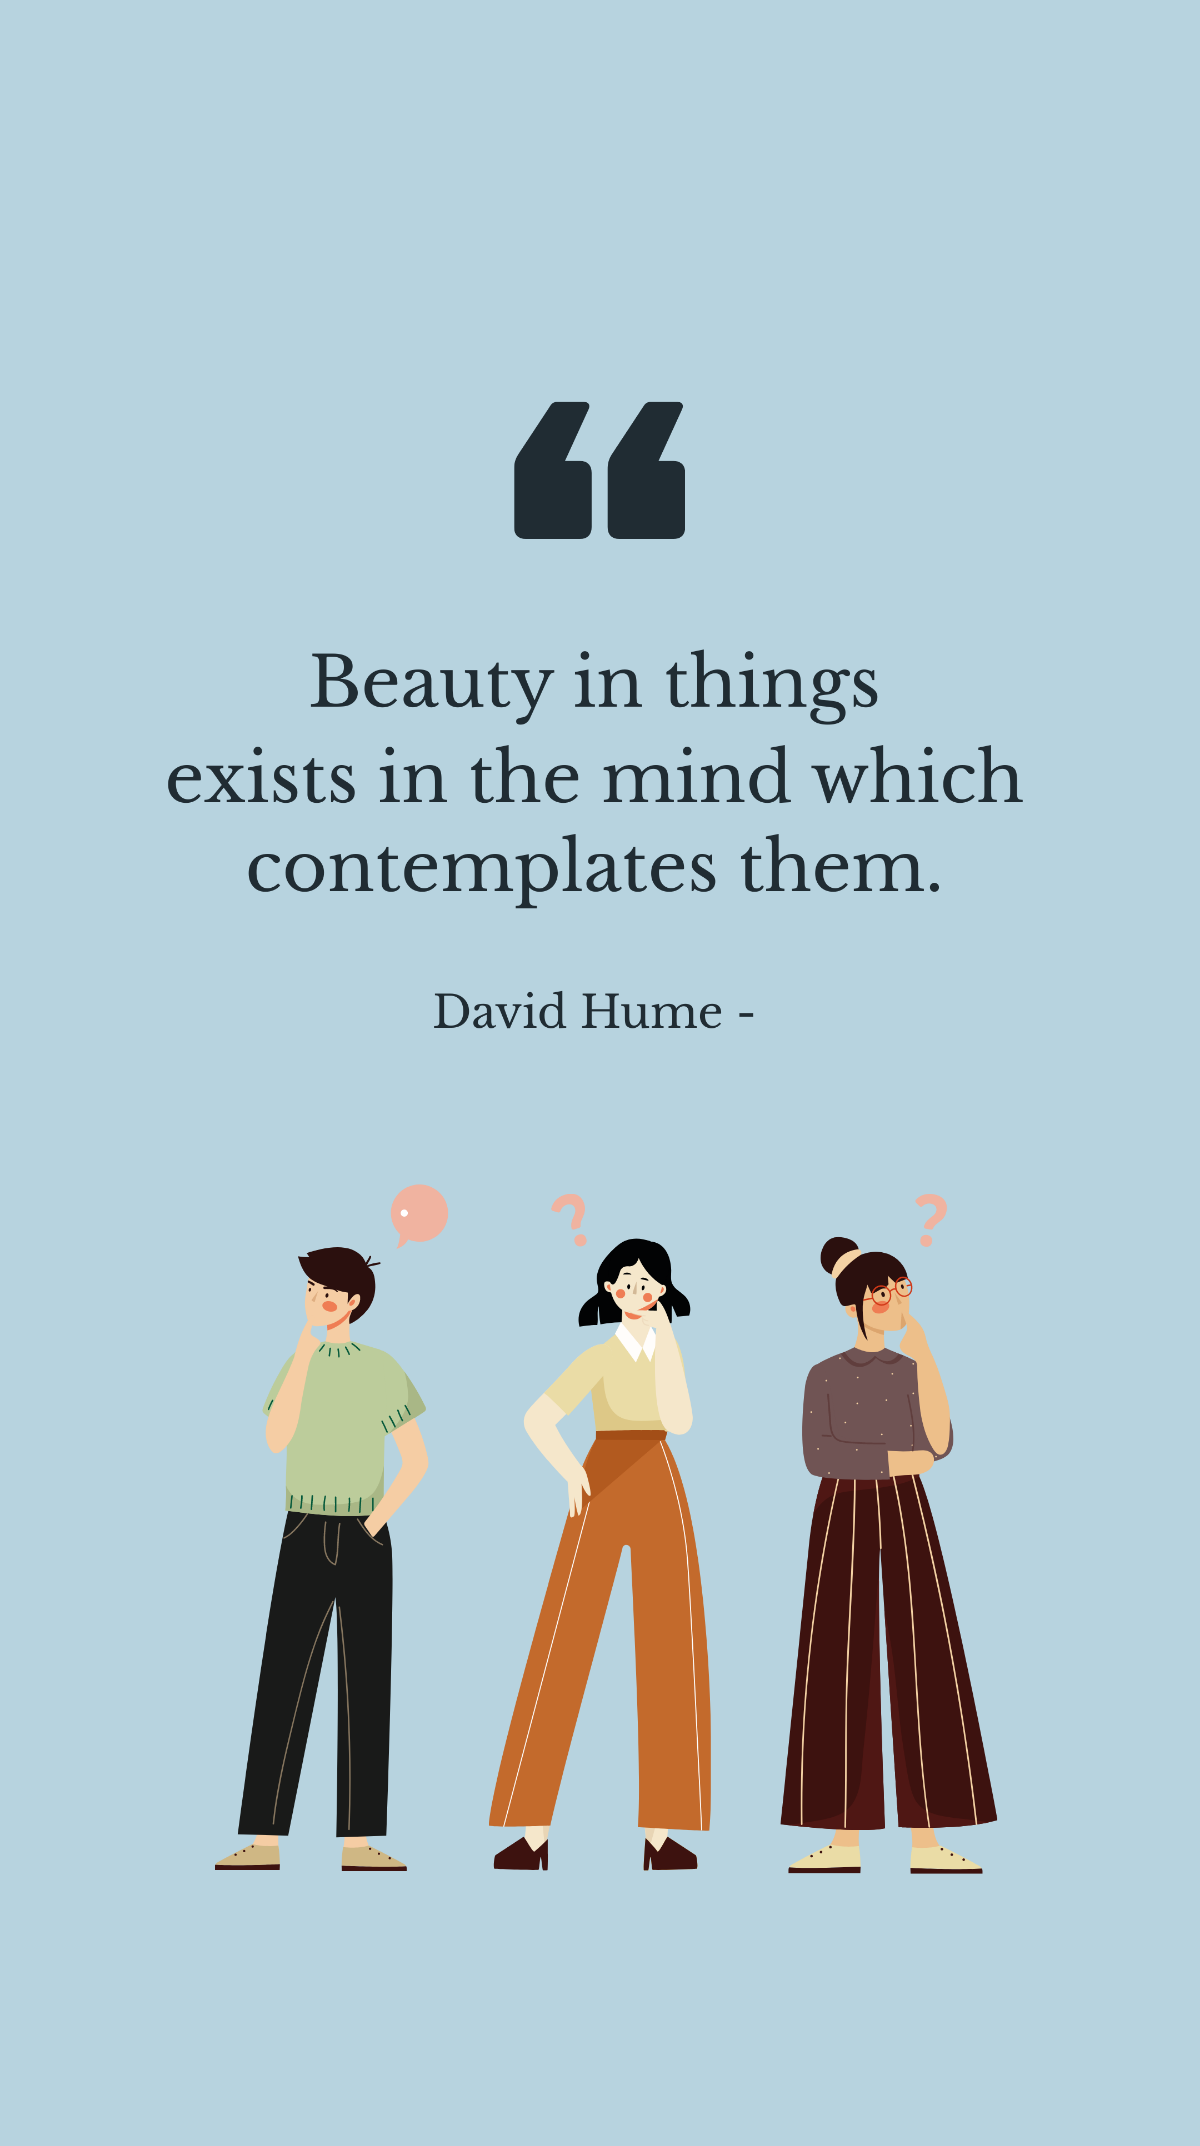 Free David Hume - Beauty in things exists in the mind which contemplates them.